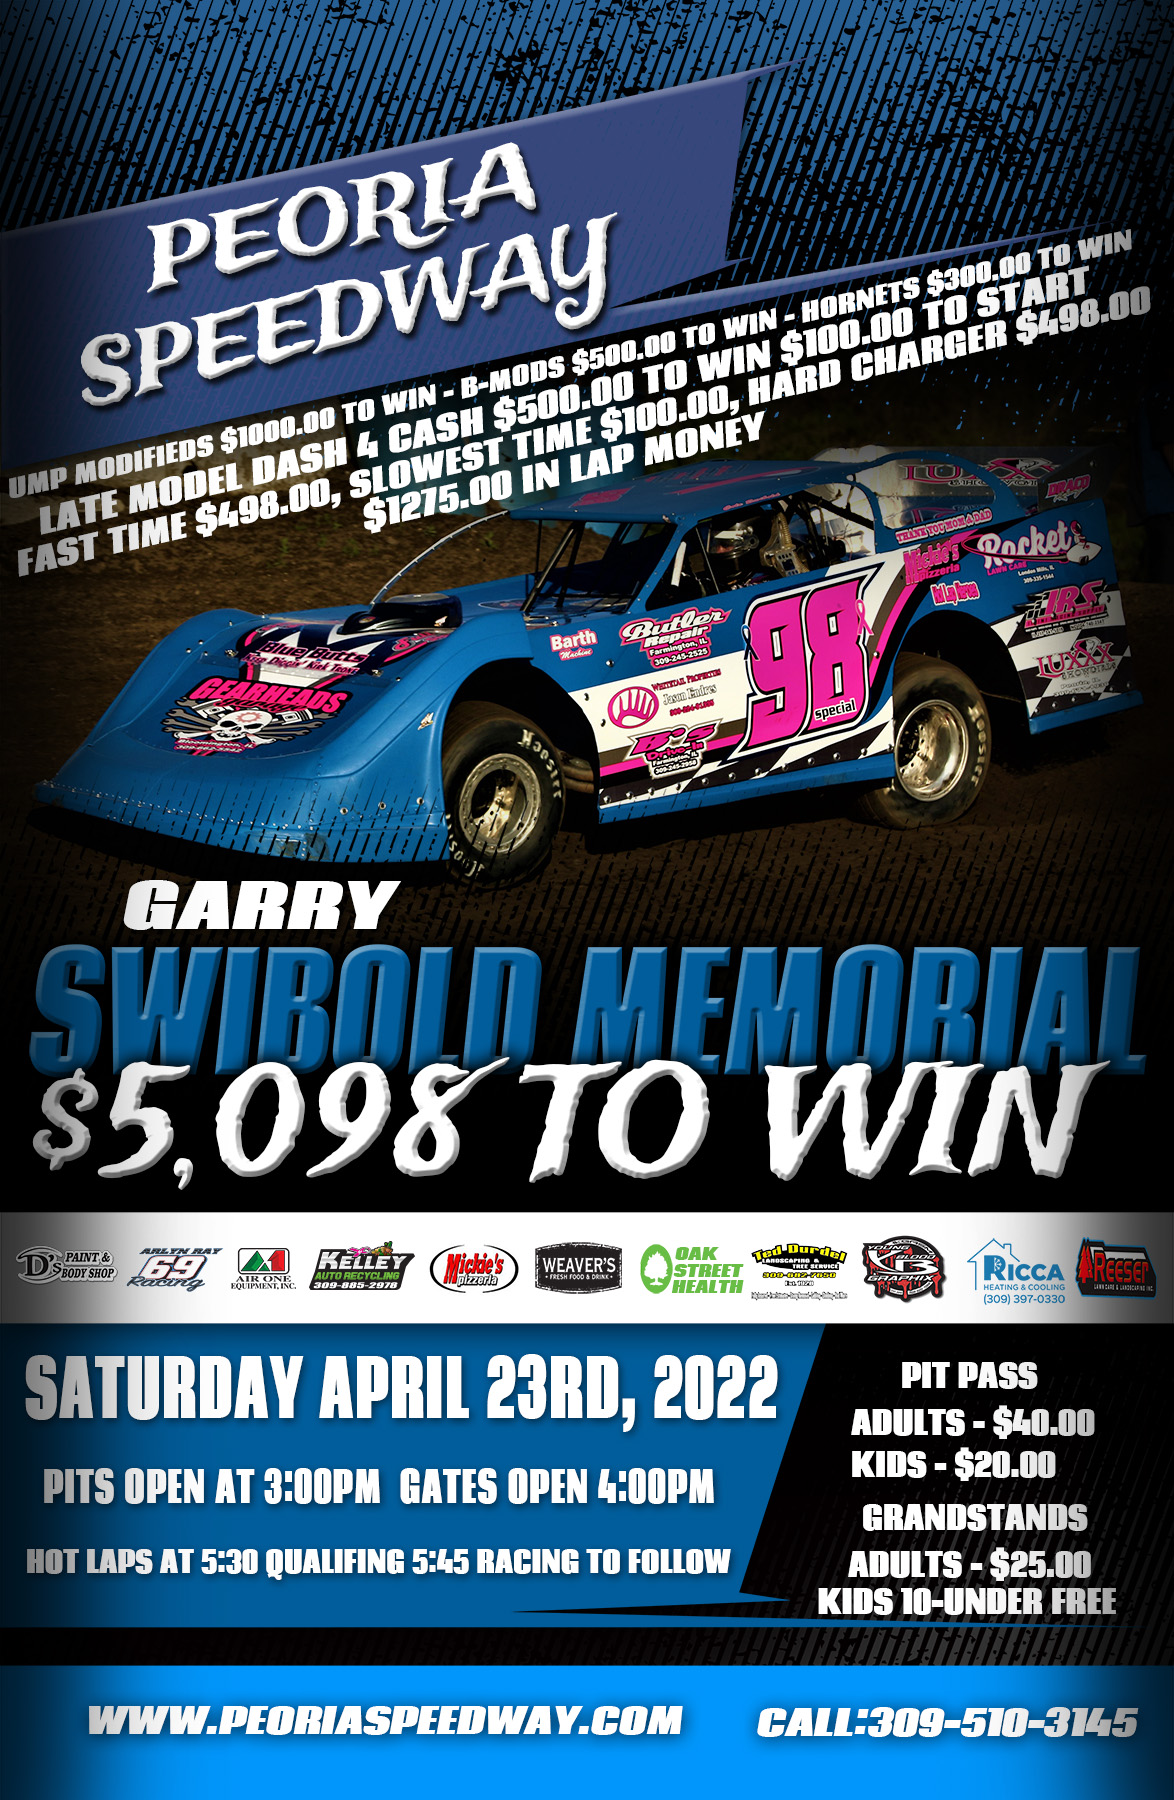 GARRY SWIBOLD MEMORIAL $5098 TO WIN $500 TO START FOR UMP LATE MODELS post thumbnail image